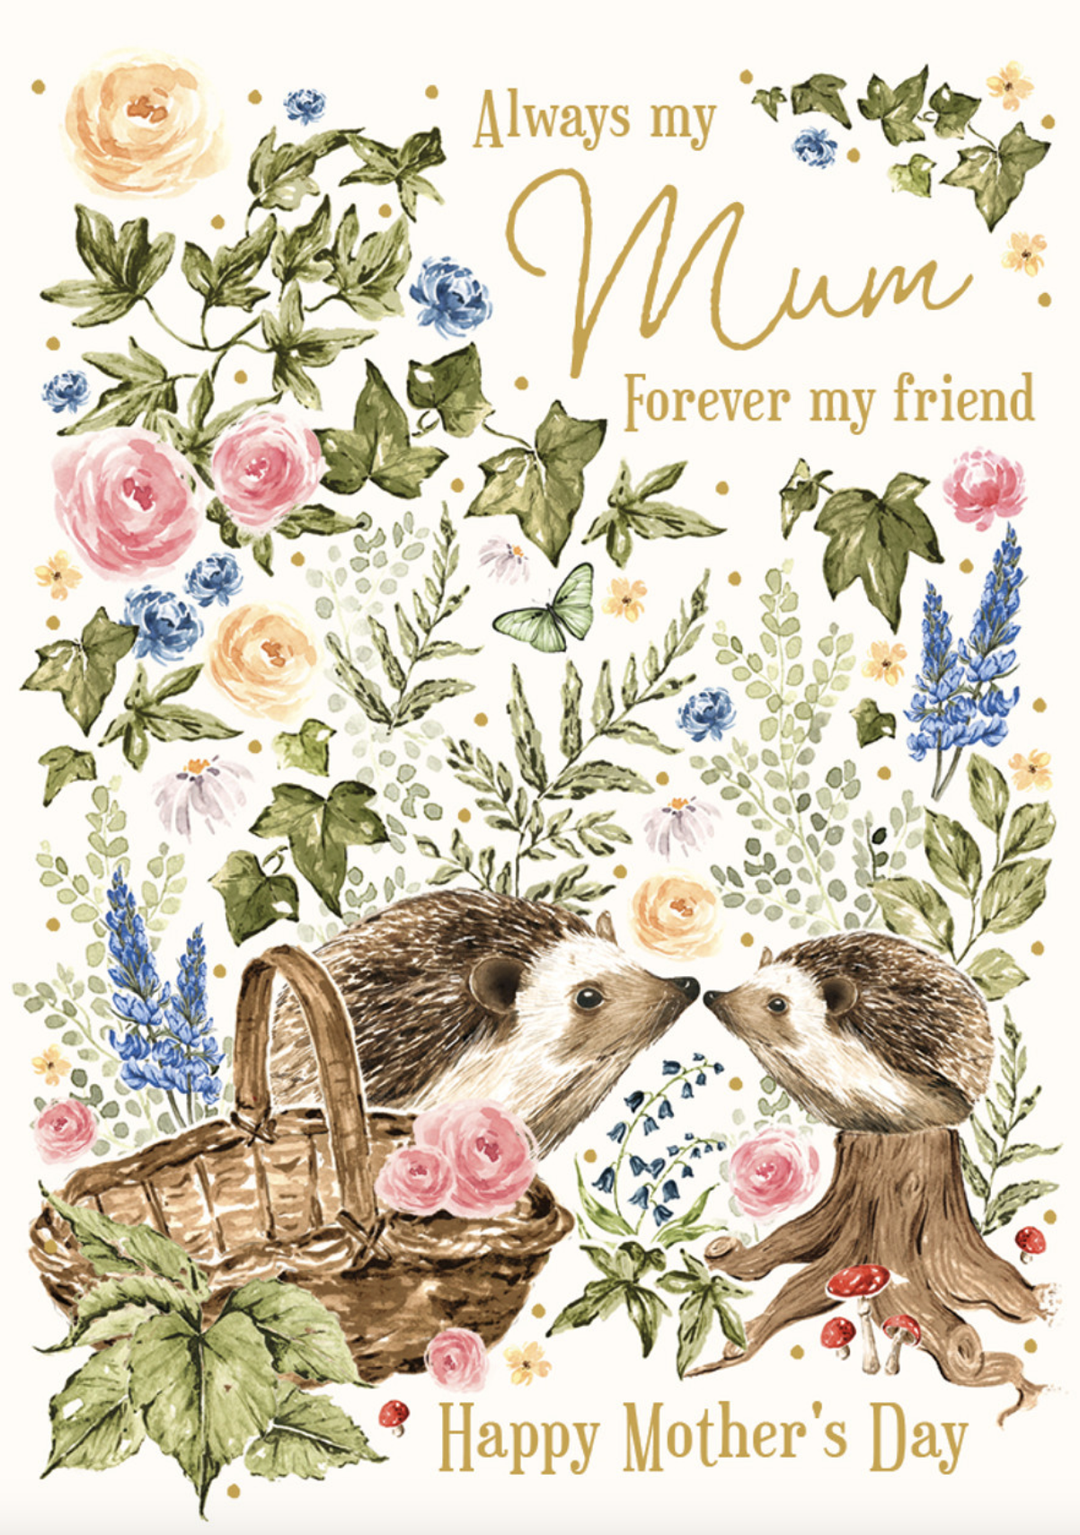 Blossom Wood Card - Always my Mum Forever my Friends